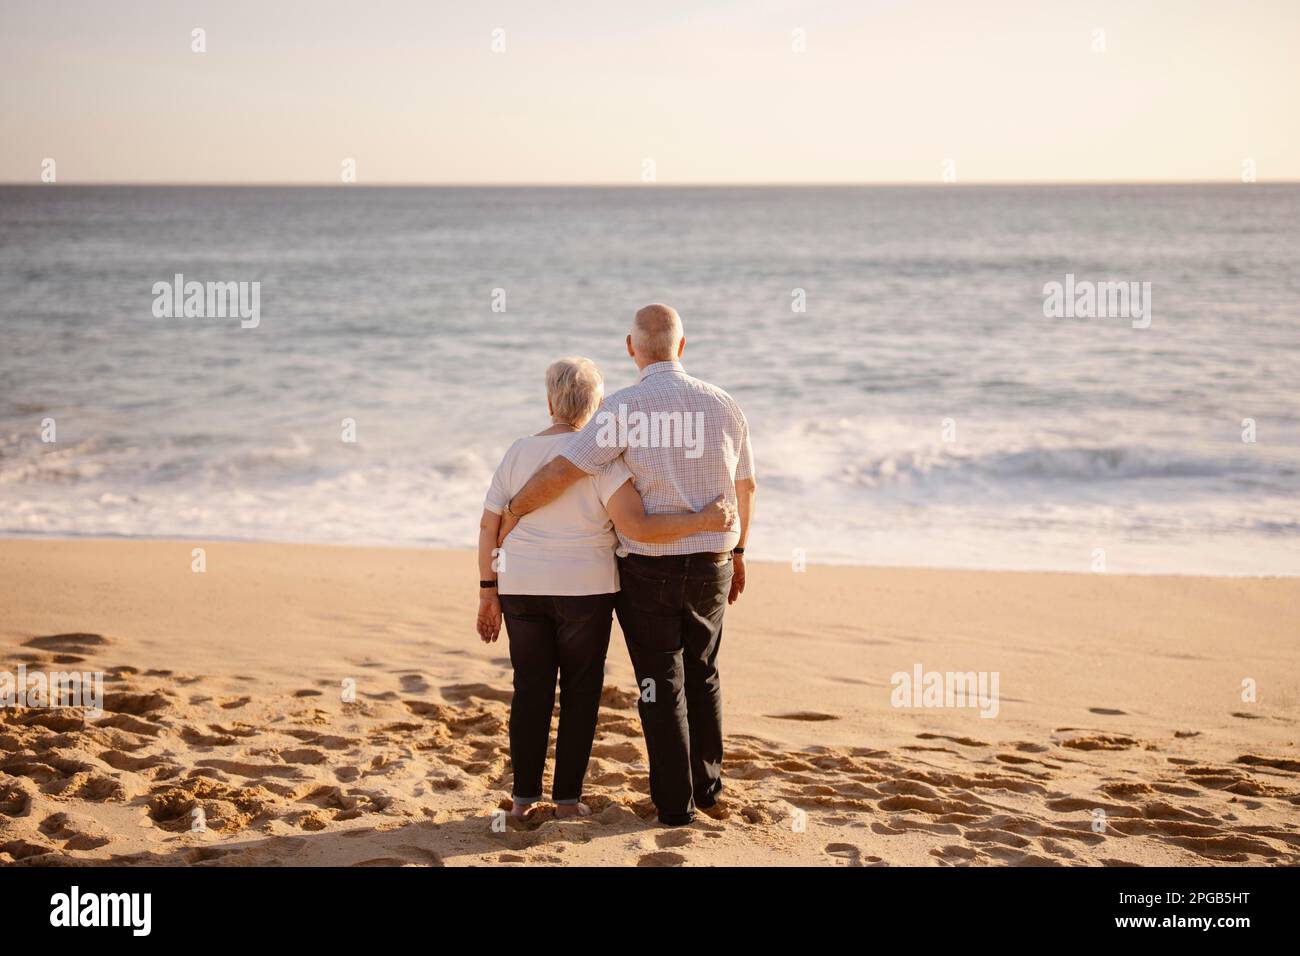 Elderly couple hugging each other on the beach seen from their back Stock Photo